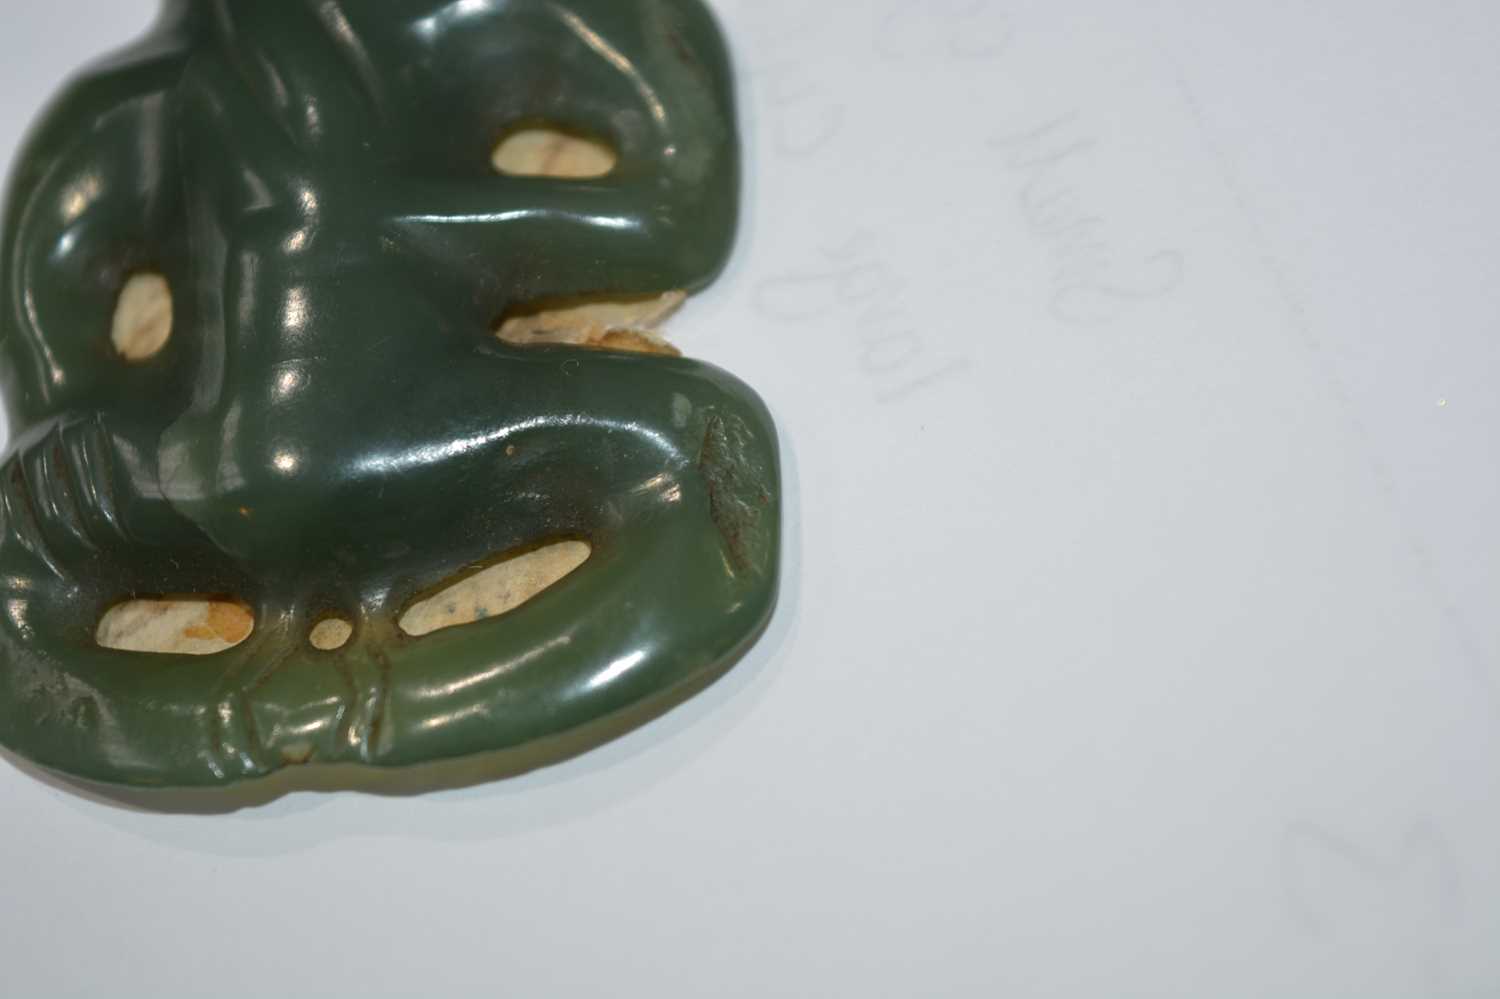 Maori hei-tiki pendant New Zealand, made of green nephrite, depicted with the head tilted to the - Image 16 of 16